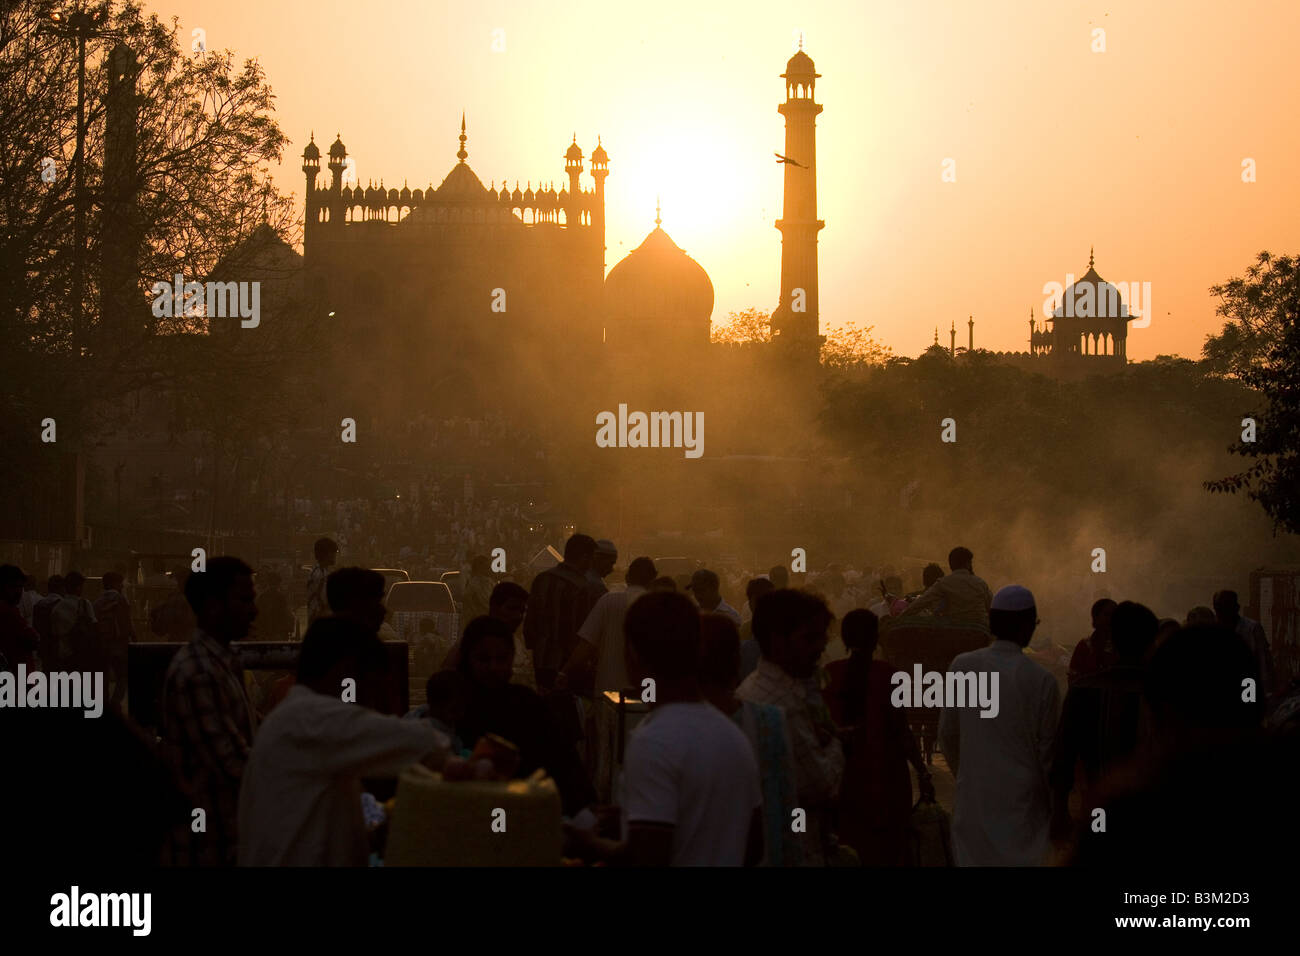 Sunset over the Jama Masjid in Old Delhi, India, The Jama Masjid is the largest mosque in India and was built by Shahjahan. Stock Photo